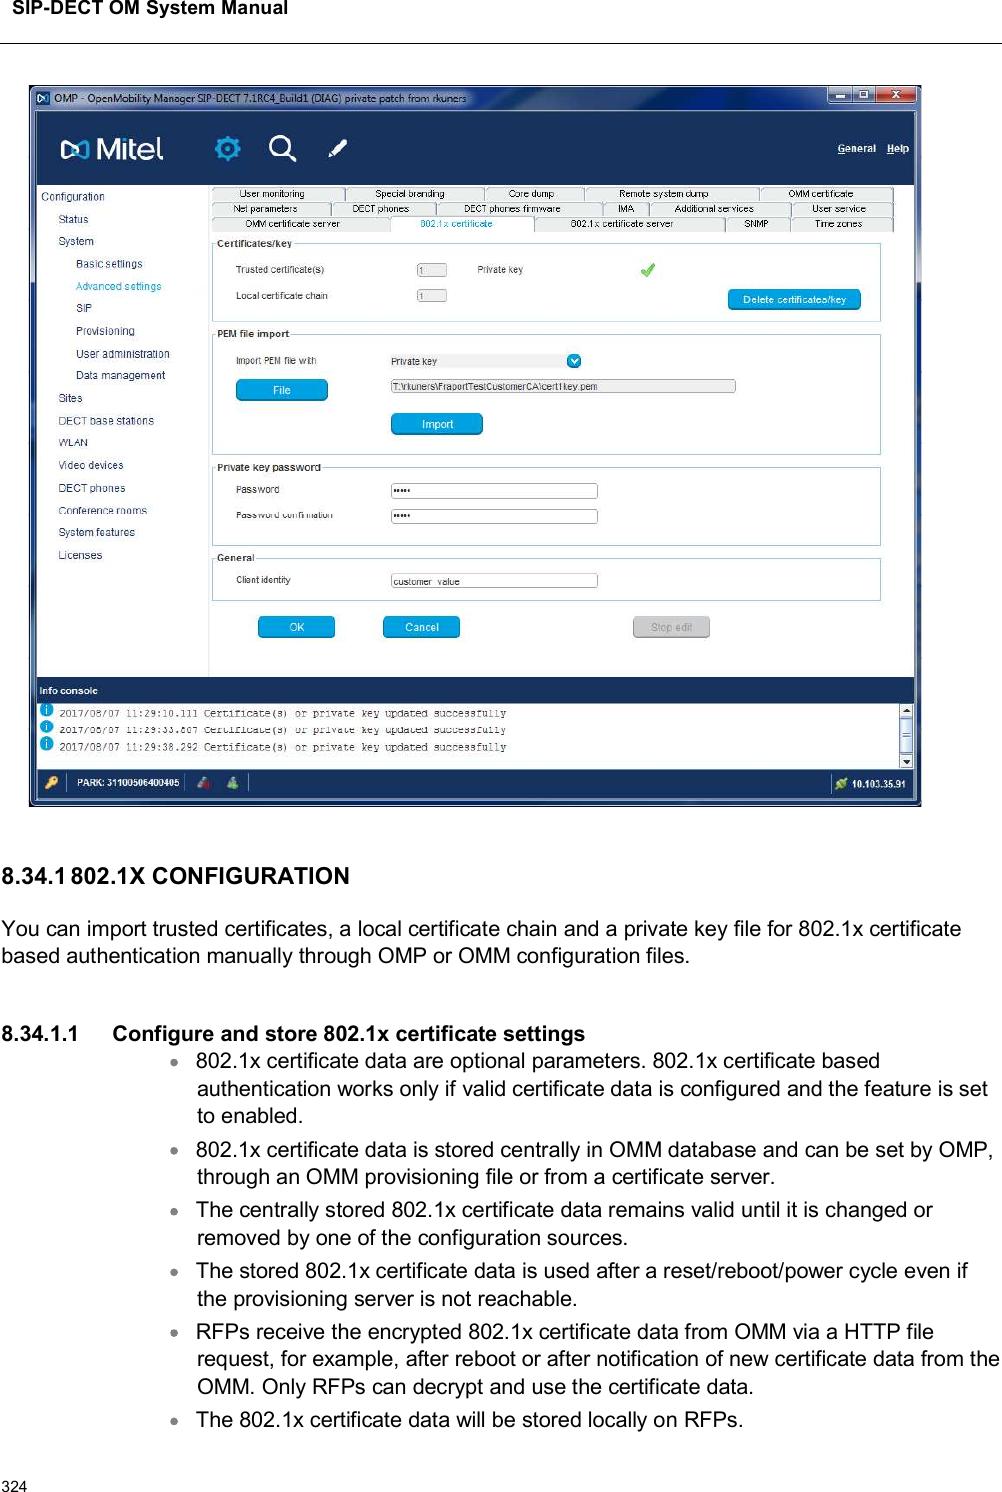 SIP-DECT OM System Manual3248.34.1 802.1X CONFIGURATIONYou can import trusted certificates, a local certificate chain and a private key file for 802.1x certificate based authentication manually through OMP or OMM configuration files.8.34.1.1 Configure and store 802.1x certificate settings802.1x certificate data are optional parameters. 802.1x certificate based authentication works only if valid certificate data is configured and the feature is set to enabled.802.1x certificate data is stored centrally in OMM database and can be set by OMP, through an OMM provisioning file or from a certificate server.The centrally stored 802.1x certificate data remains valid until it is changed or removed by one of the configuration sources.The stored 802.1x certificate data is used after a reset/reboot/power cycle even if the provisioning server is not reachable.RFPs receive the encrypted 802.1x certificate data from OMM via a HTTP file request, for example, after reboot or after notification of new certificate data from the OMM. Only RFPs can decrypt and use the certificate data.The 802.1x certificate data will be stored locally on RFPs.